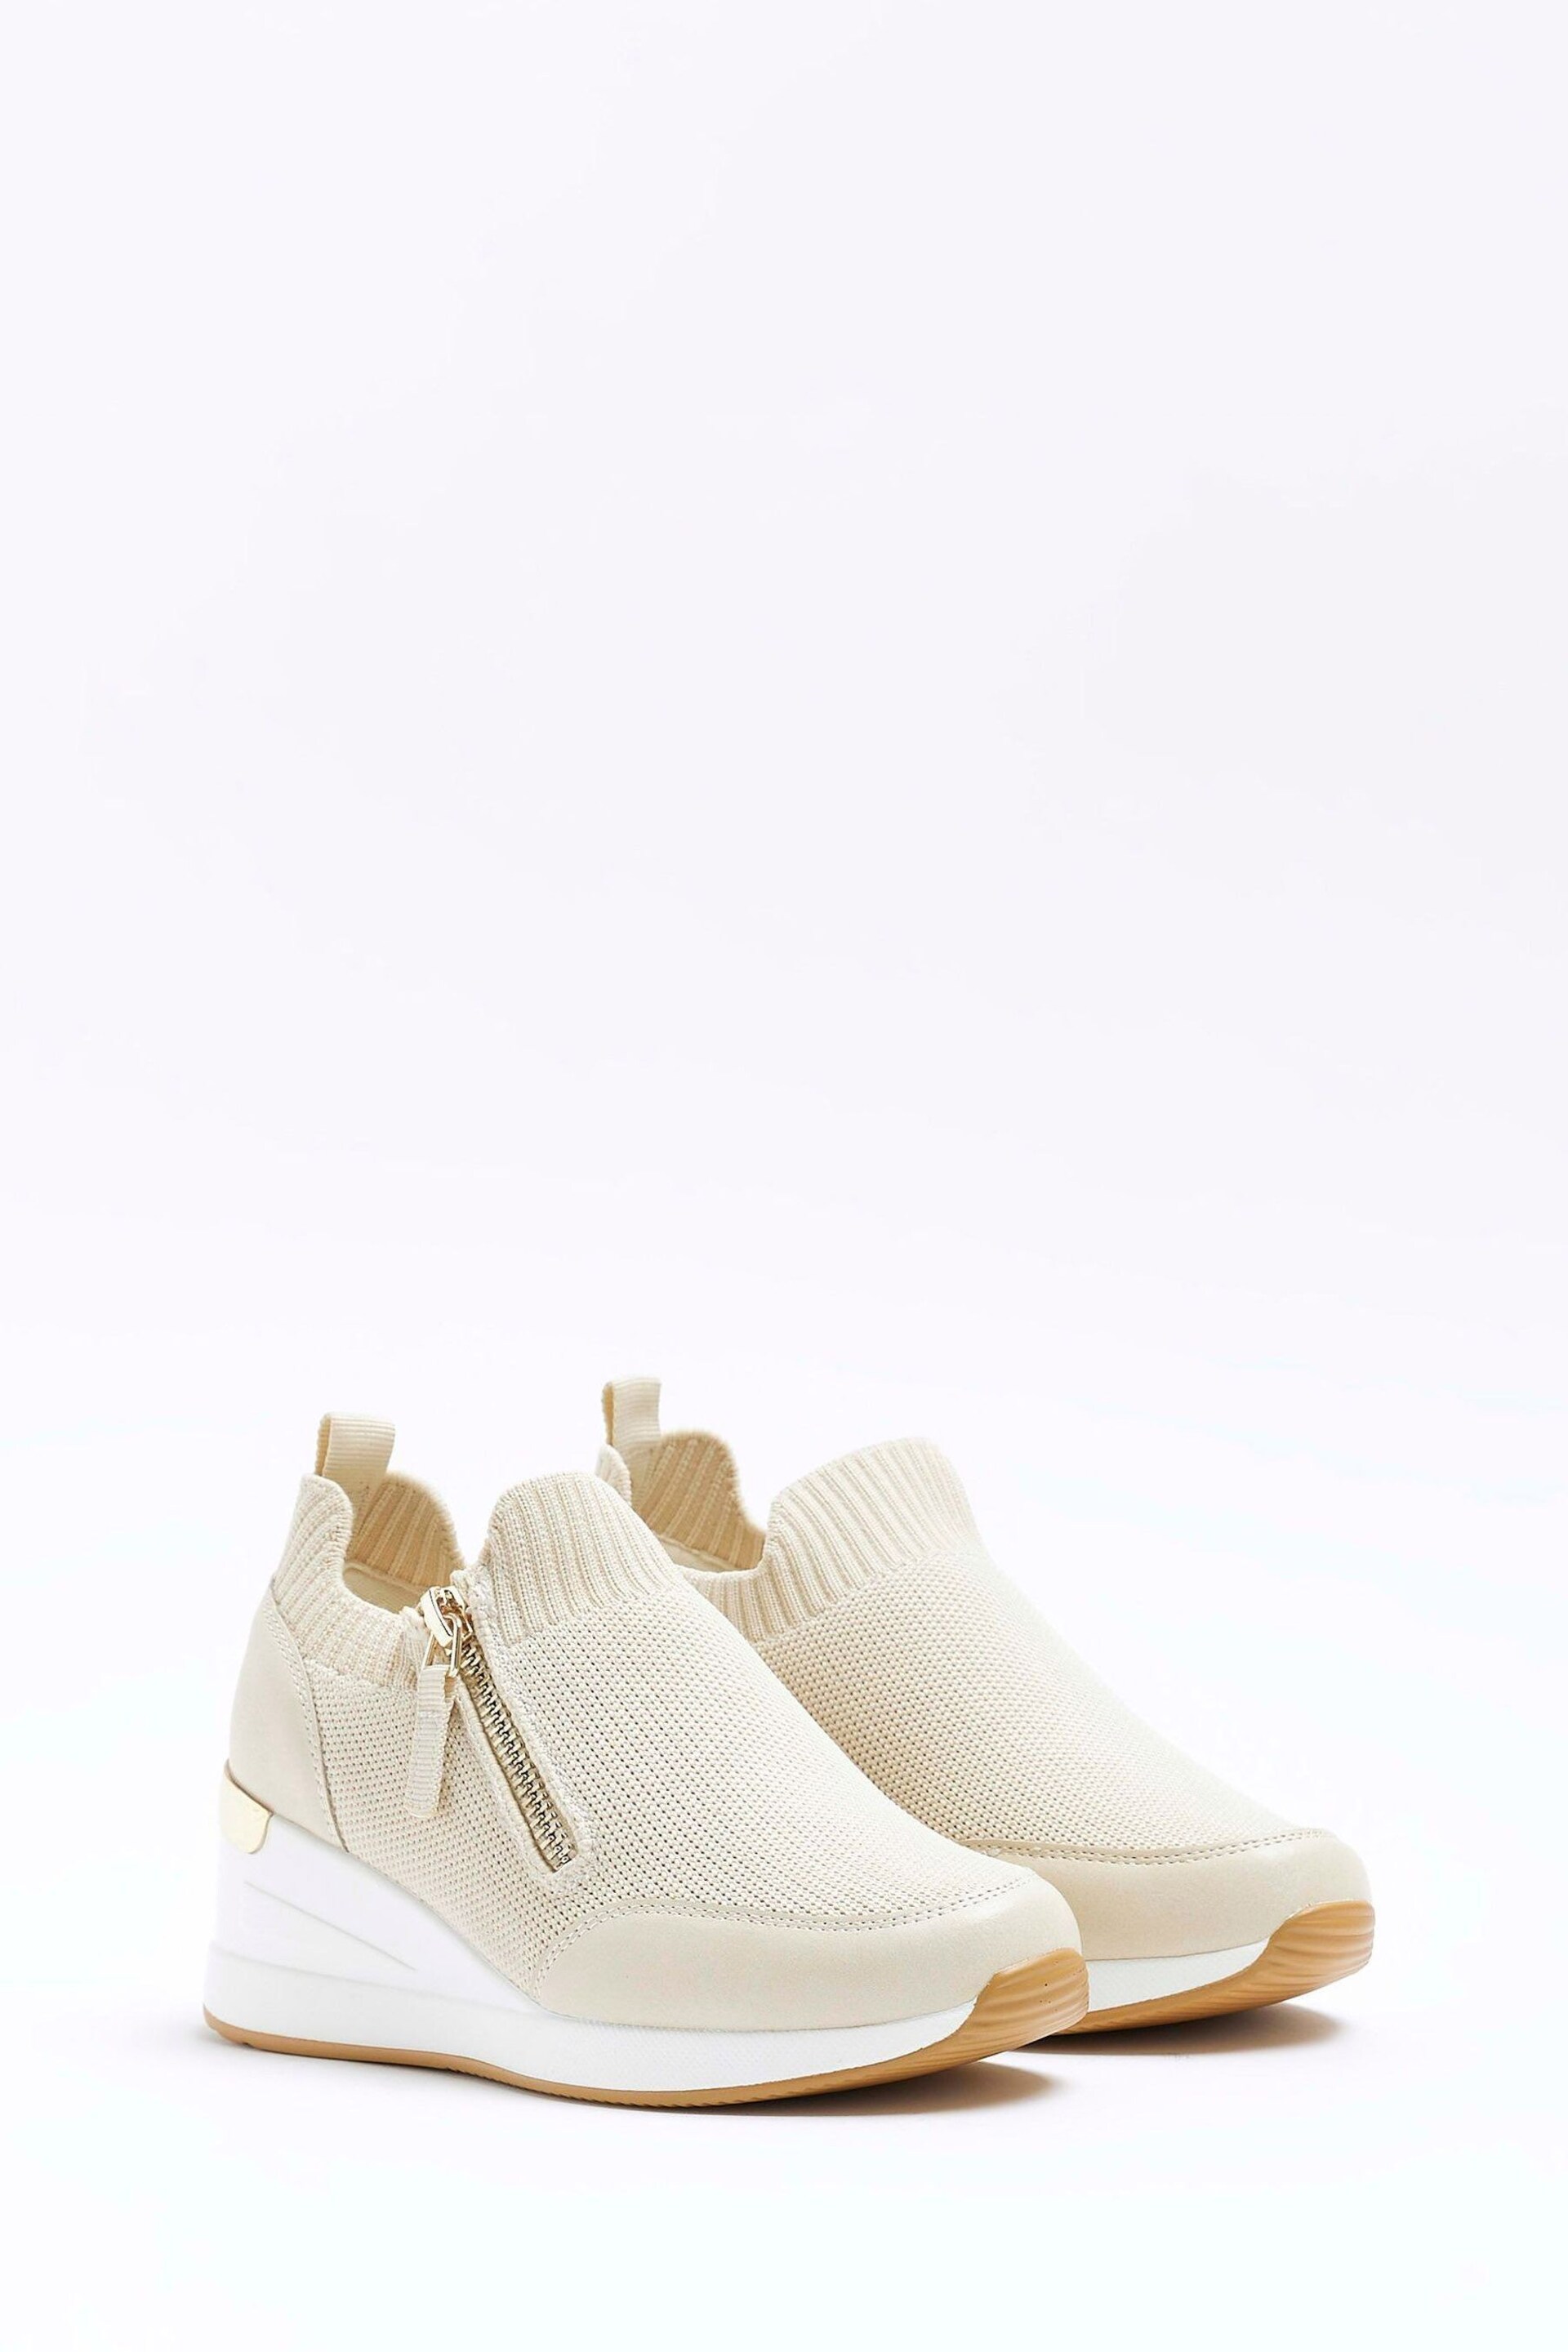 River Island Brown Girls Drenched Wedge Trainers - Image 2 of 4